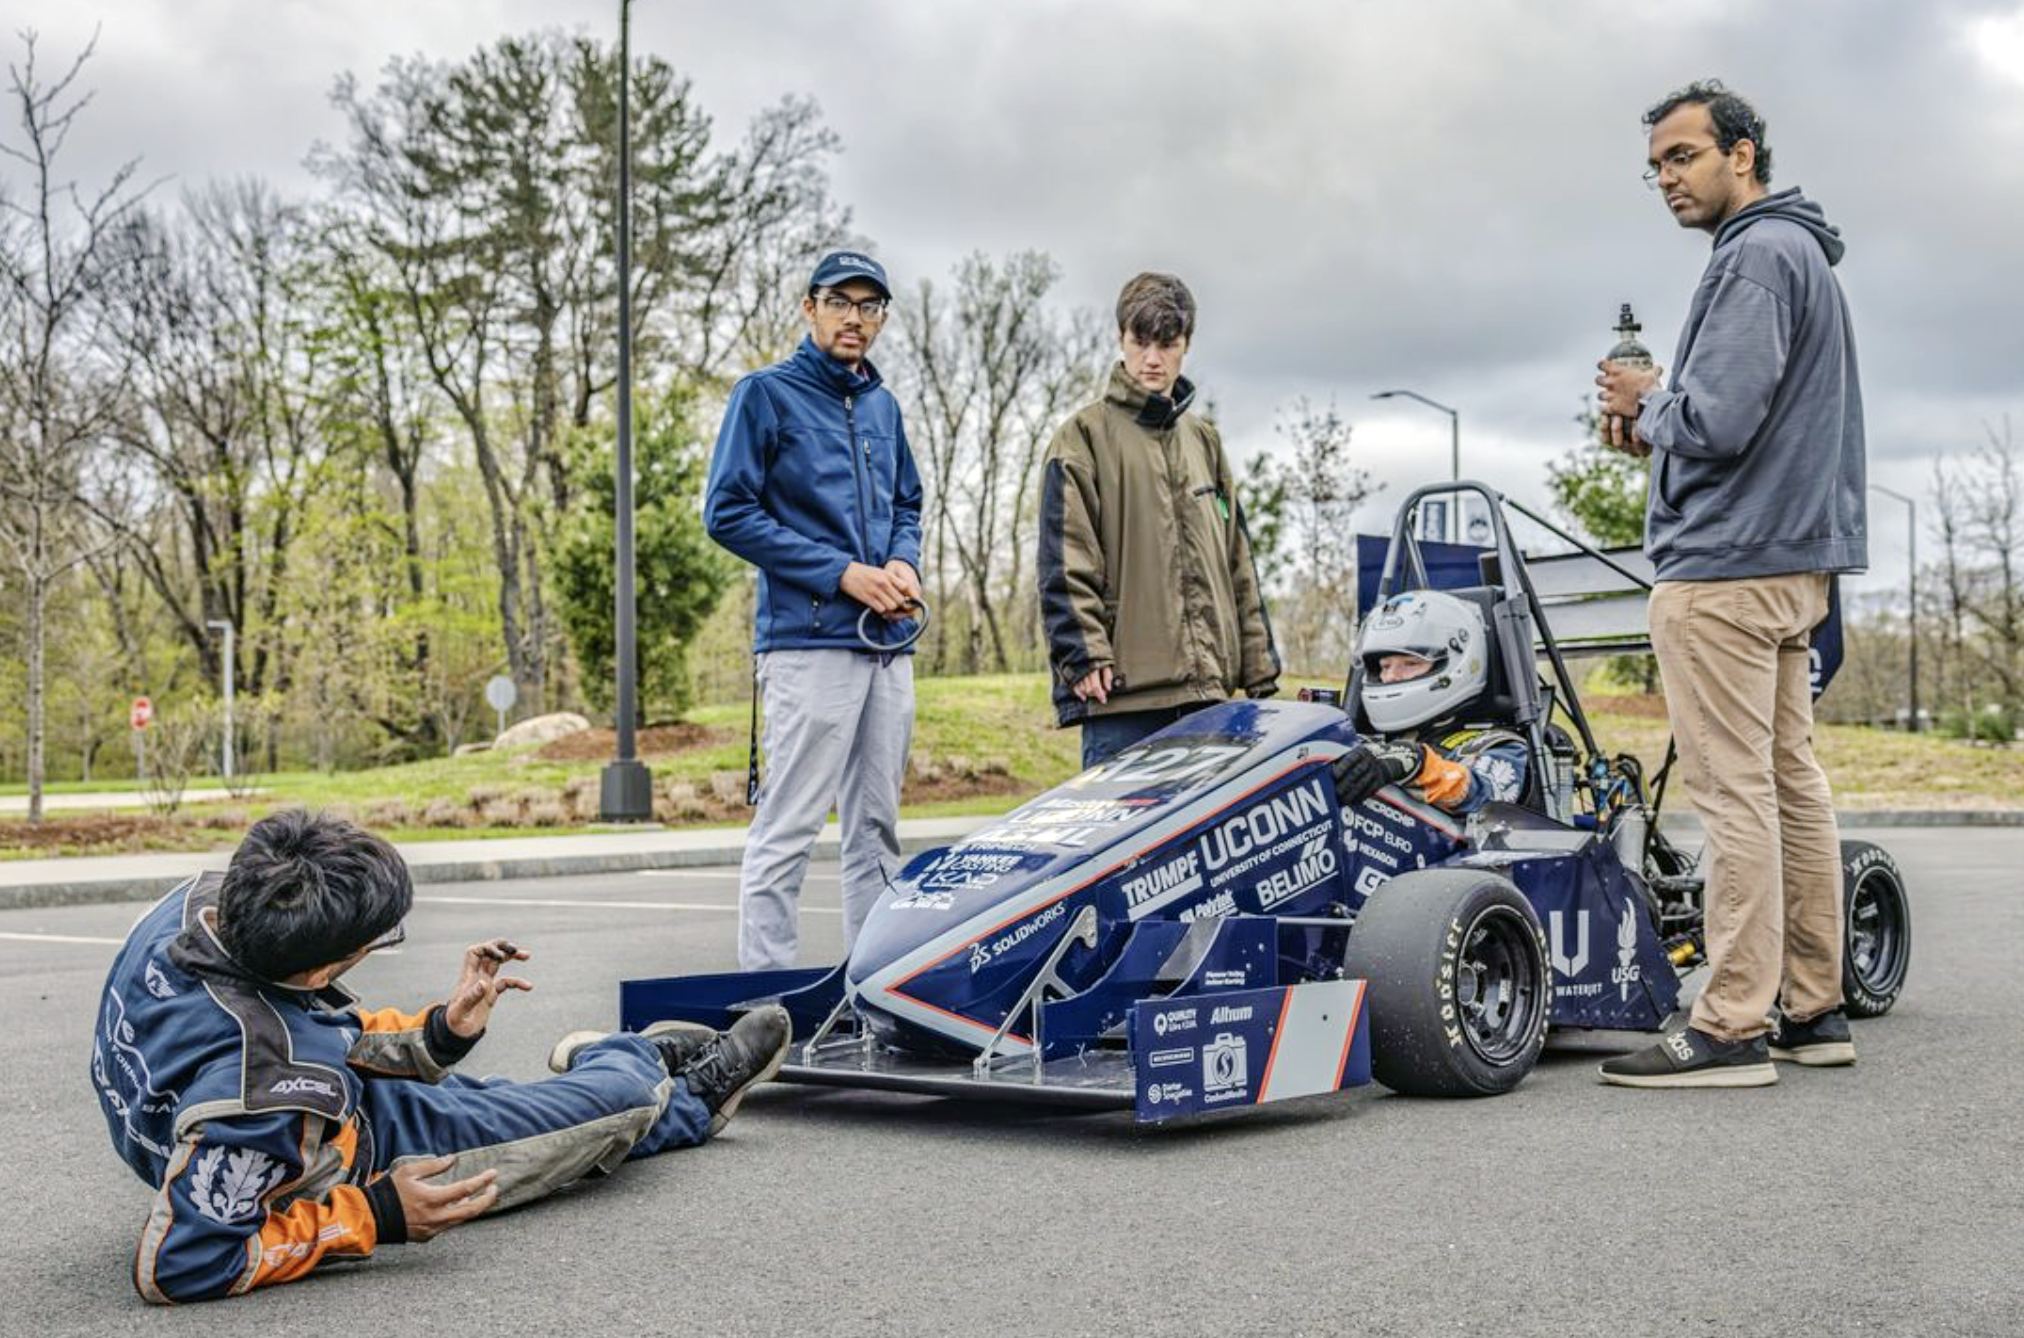 The UConn Formula SAE team examines their vehicle during the competition at Michigan International Speedway.  (Photo courtesy of Milton Levin) 